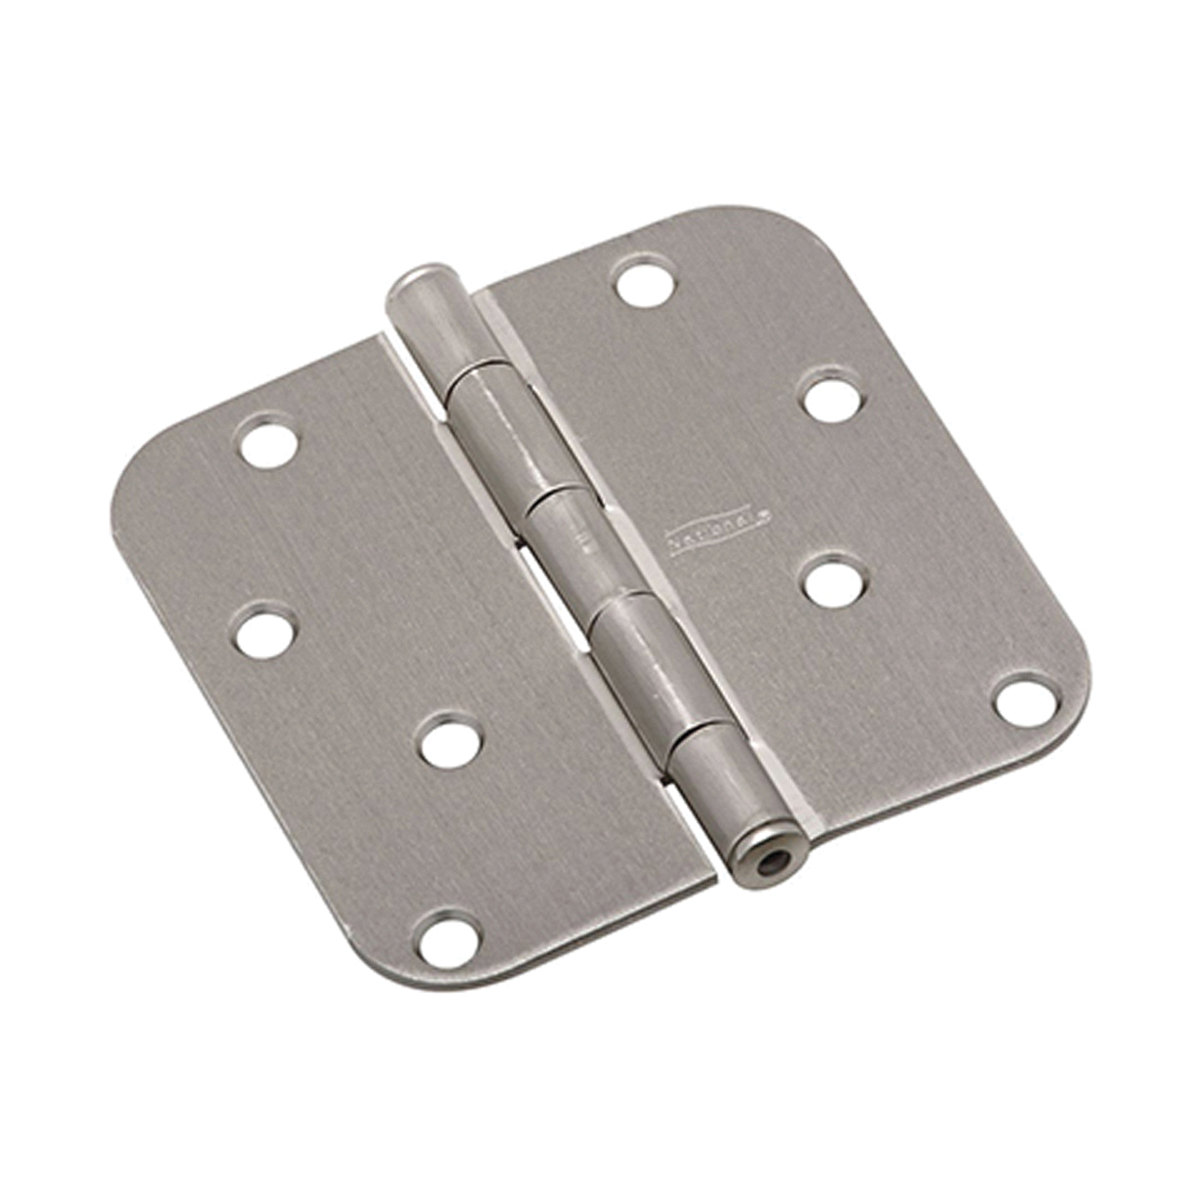 N830-243 Door Hinge, Cold Rolled Steel, Satin Nickel, Non-Rising, Removable Pin, Full-Mortise Mounting